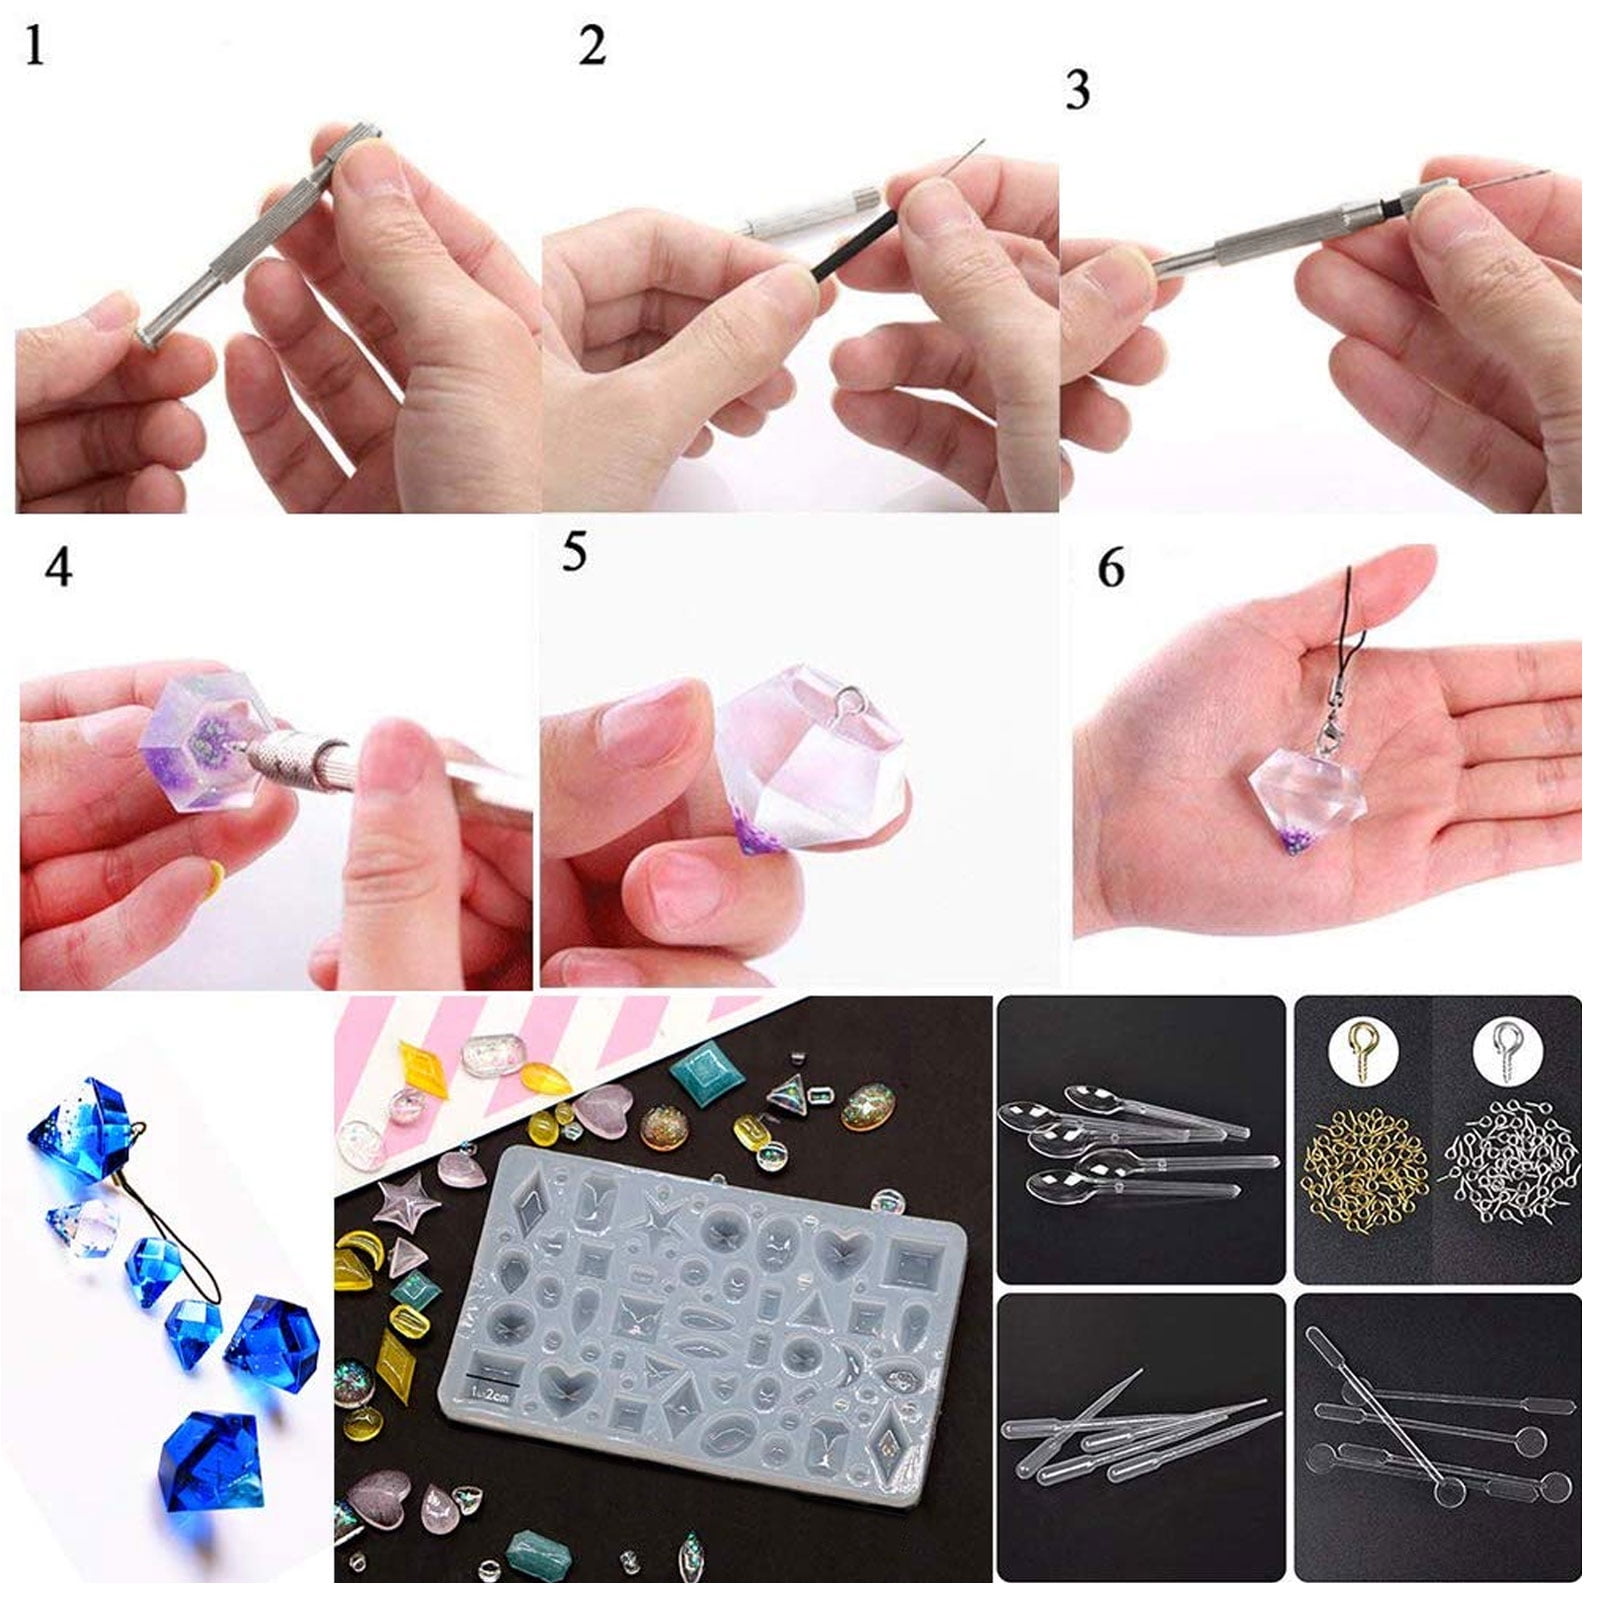 Homyplaza 28 Cavities UV Resin Molds Silicone,Jewelry Resin Casting  Molds,Candy Molds Clay Mold Dominoes Chocolate Mold Silicone Mold for  Pendant